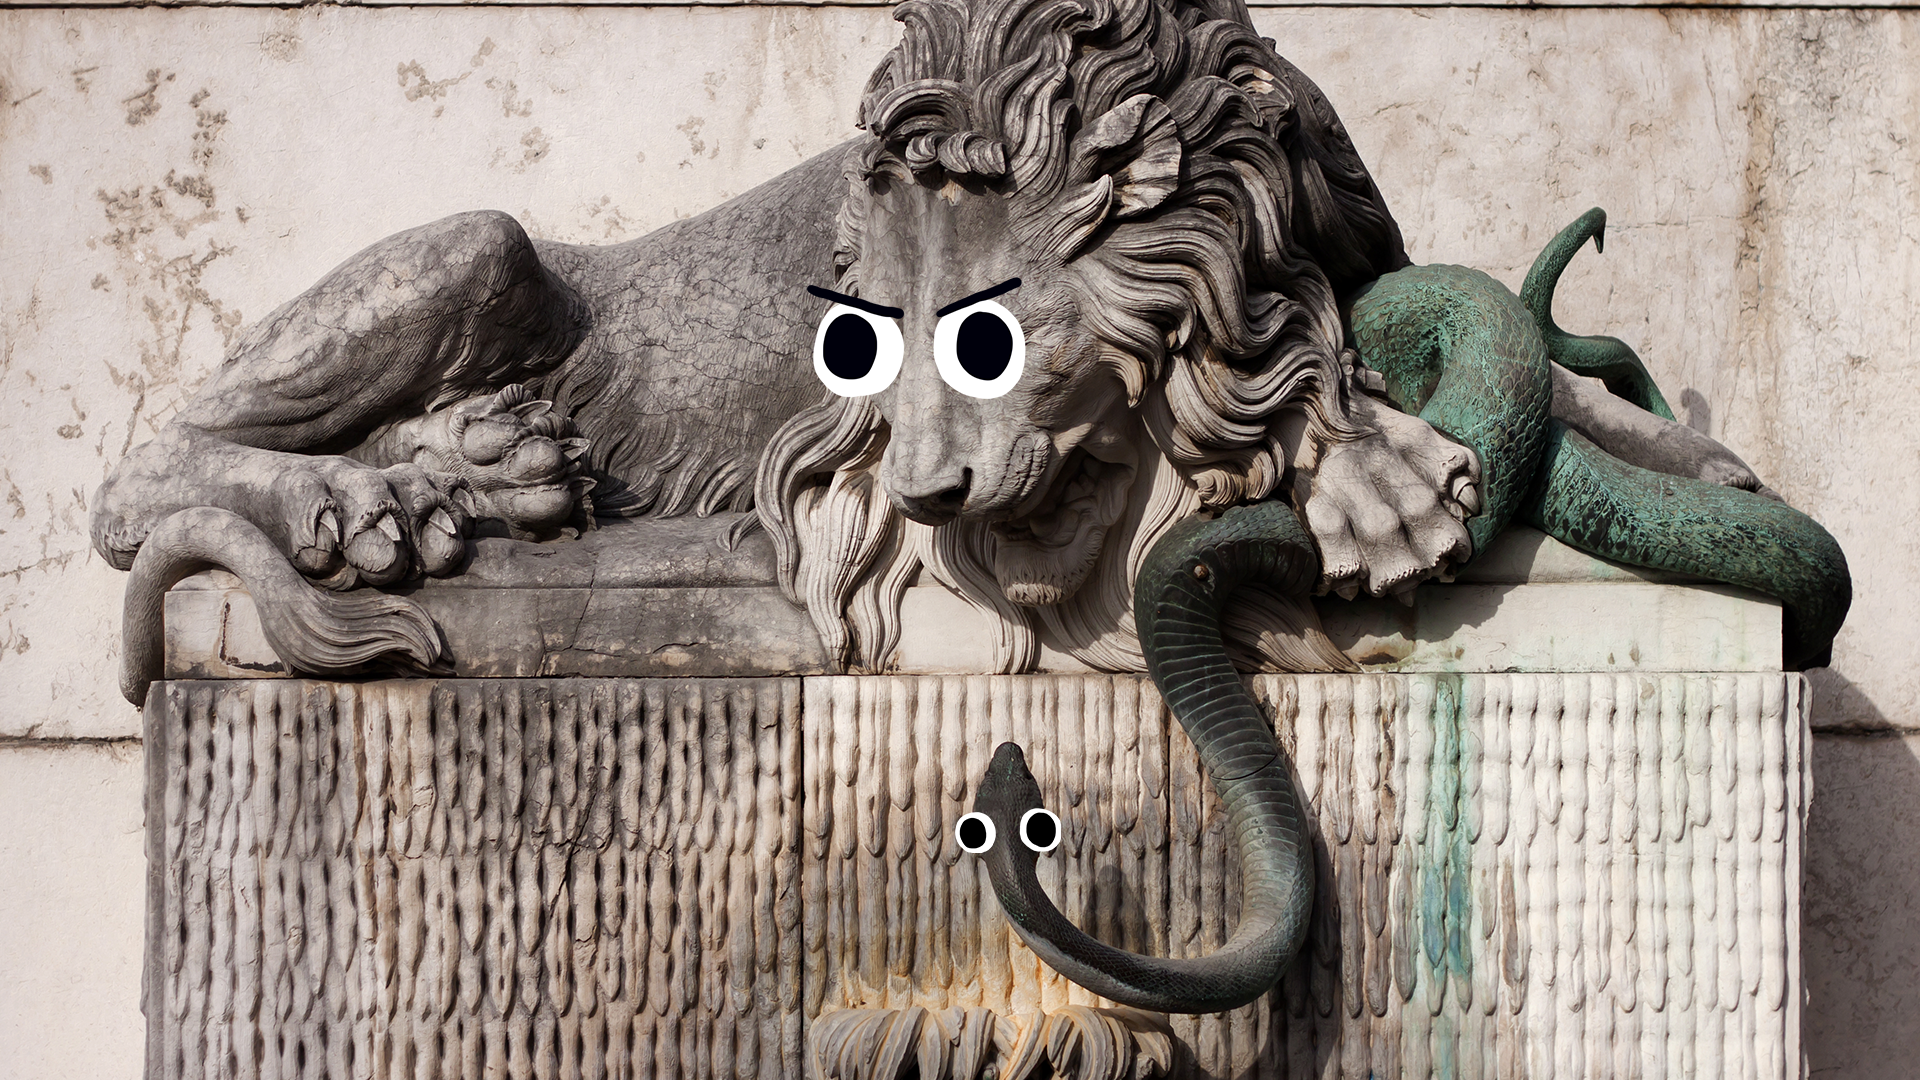 A statue of a lion and a snake